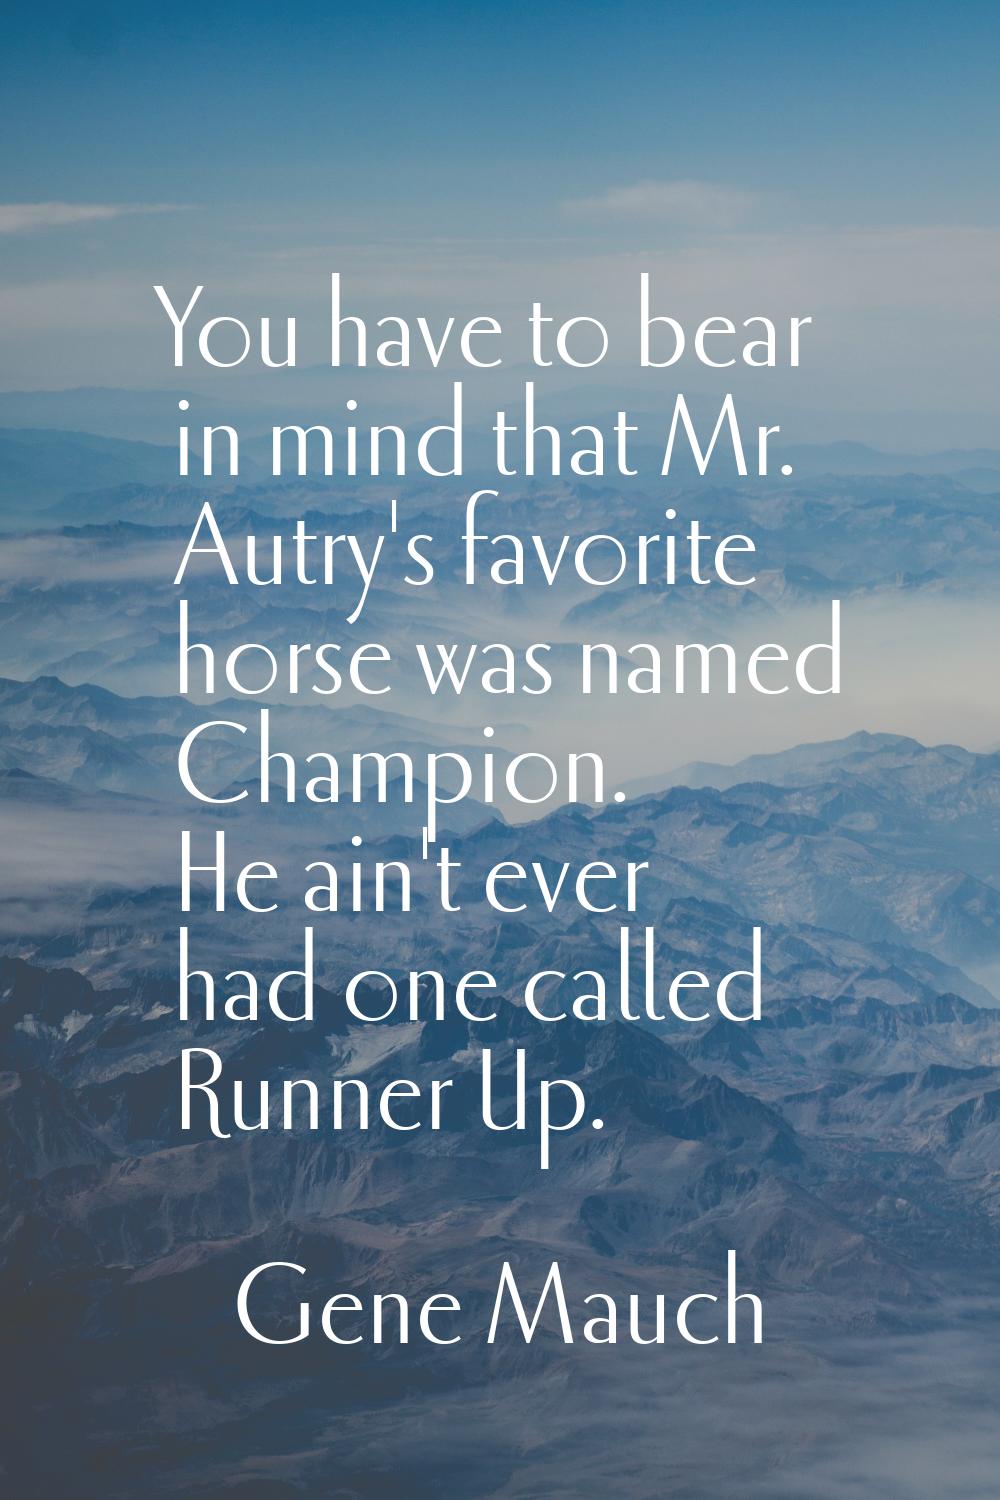 You have to bear in mind that Mr. Autry's favorite horse was named Champion. He ain't ever had one 